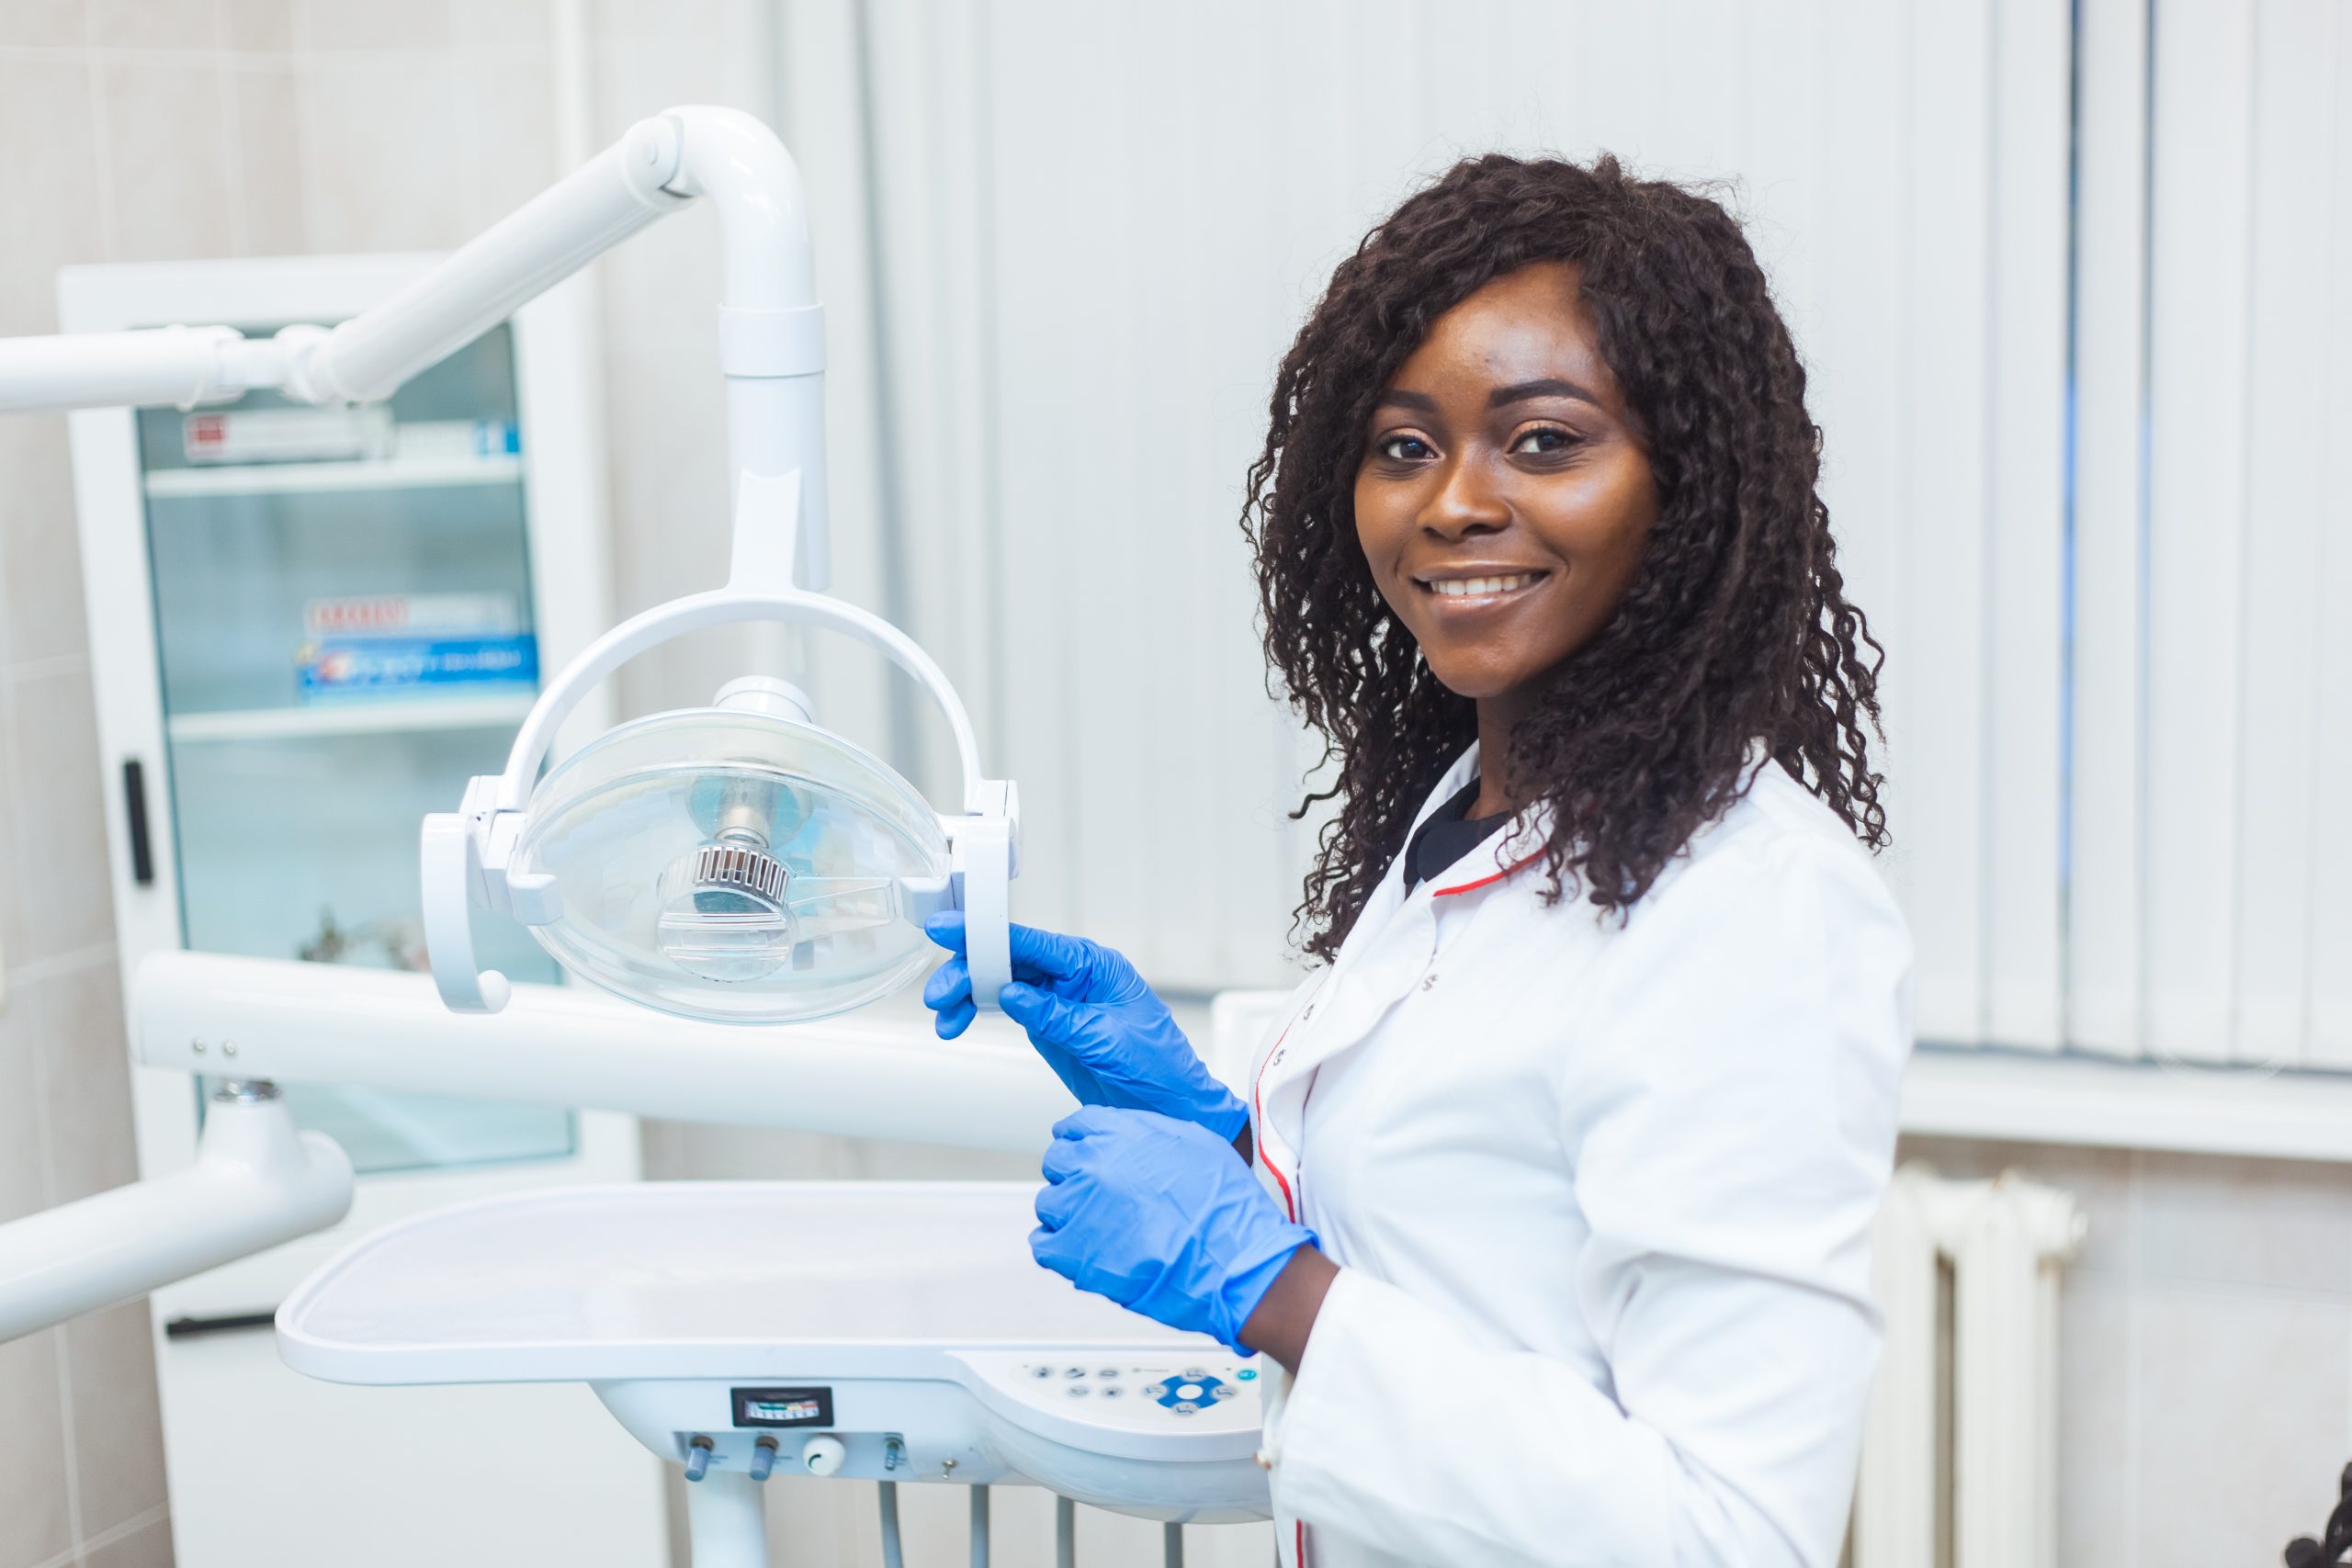 Image of dentist for our FAQ on What to Major in to Become a Dentist